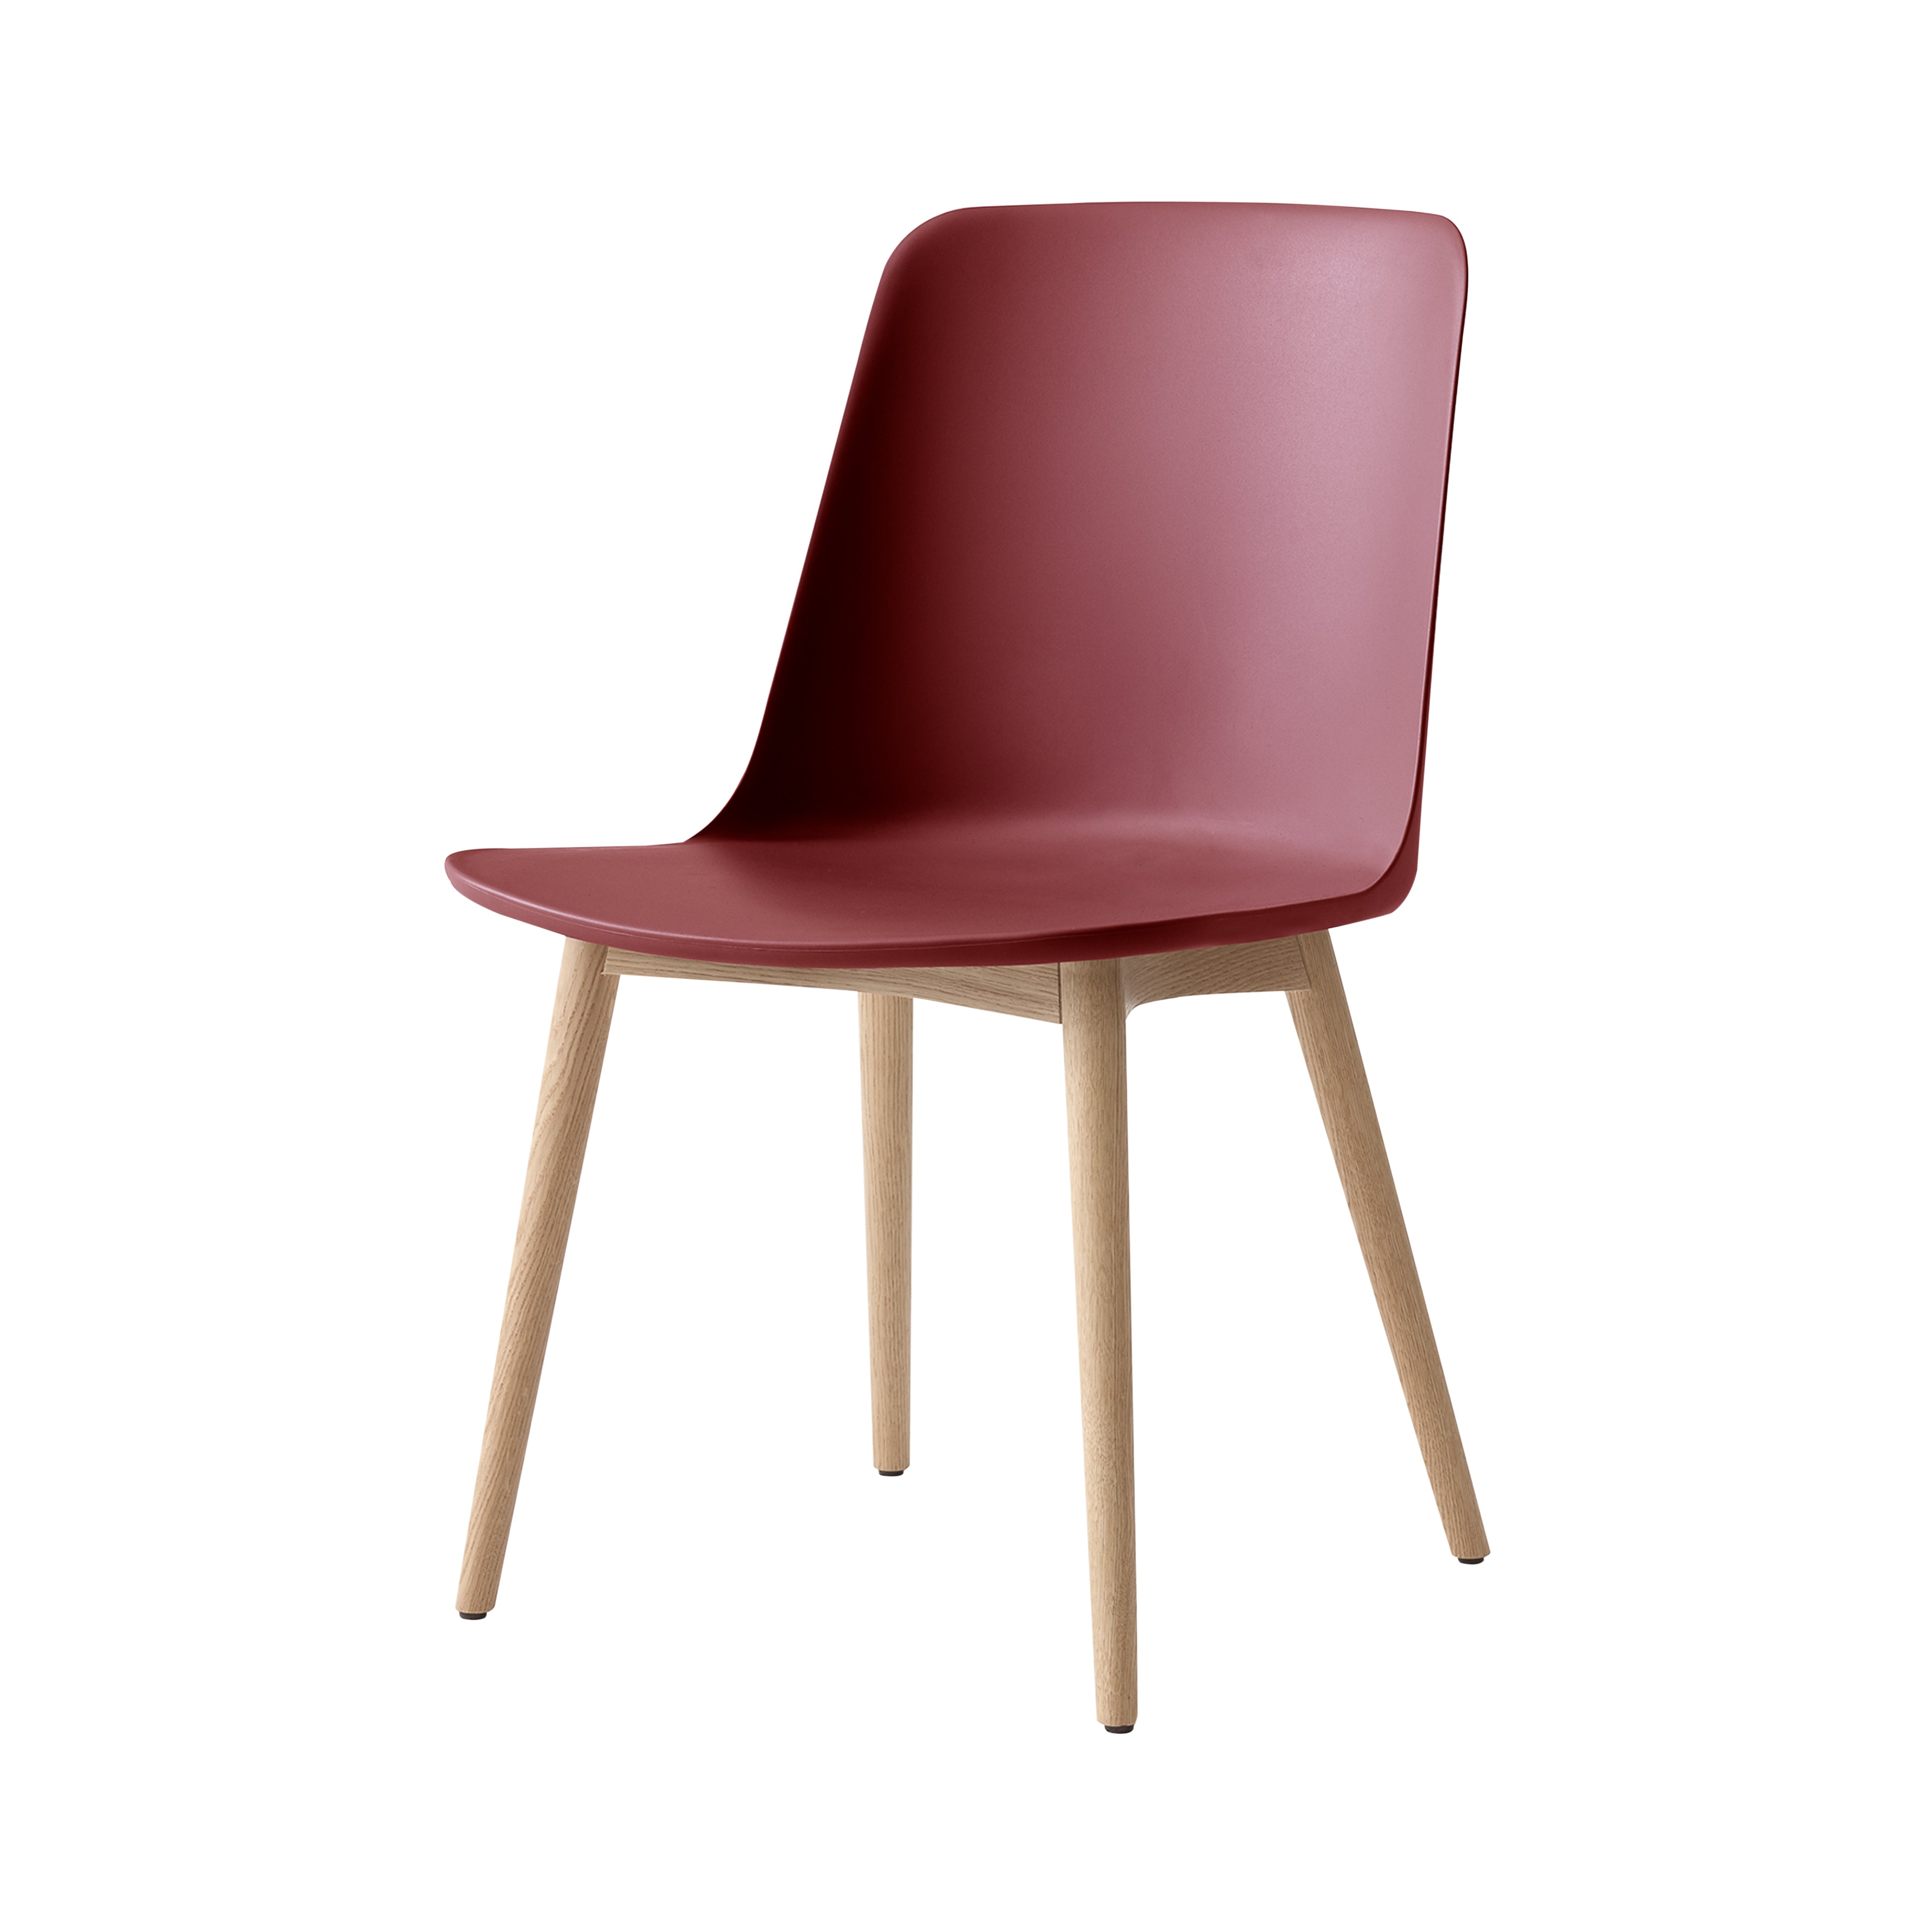 Rely Chair HW71: Oak + Red Brown